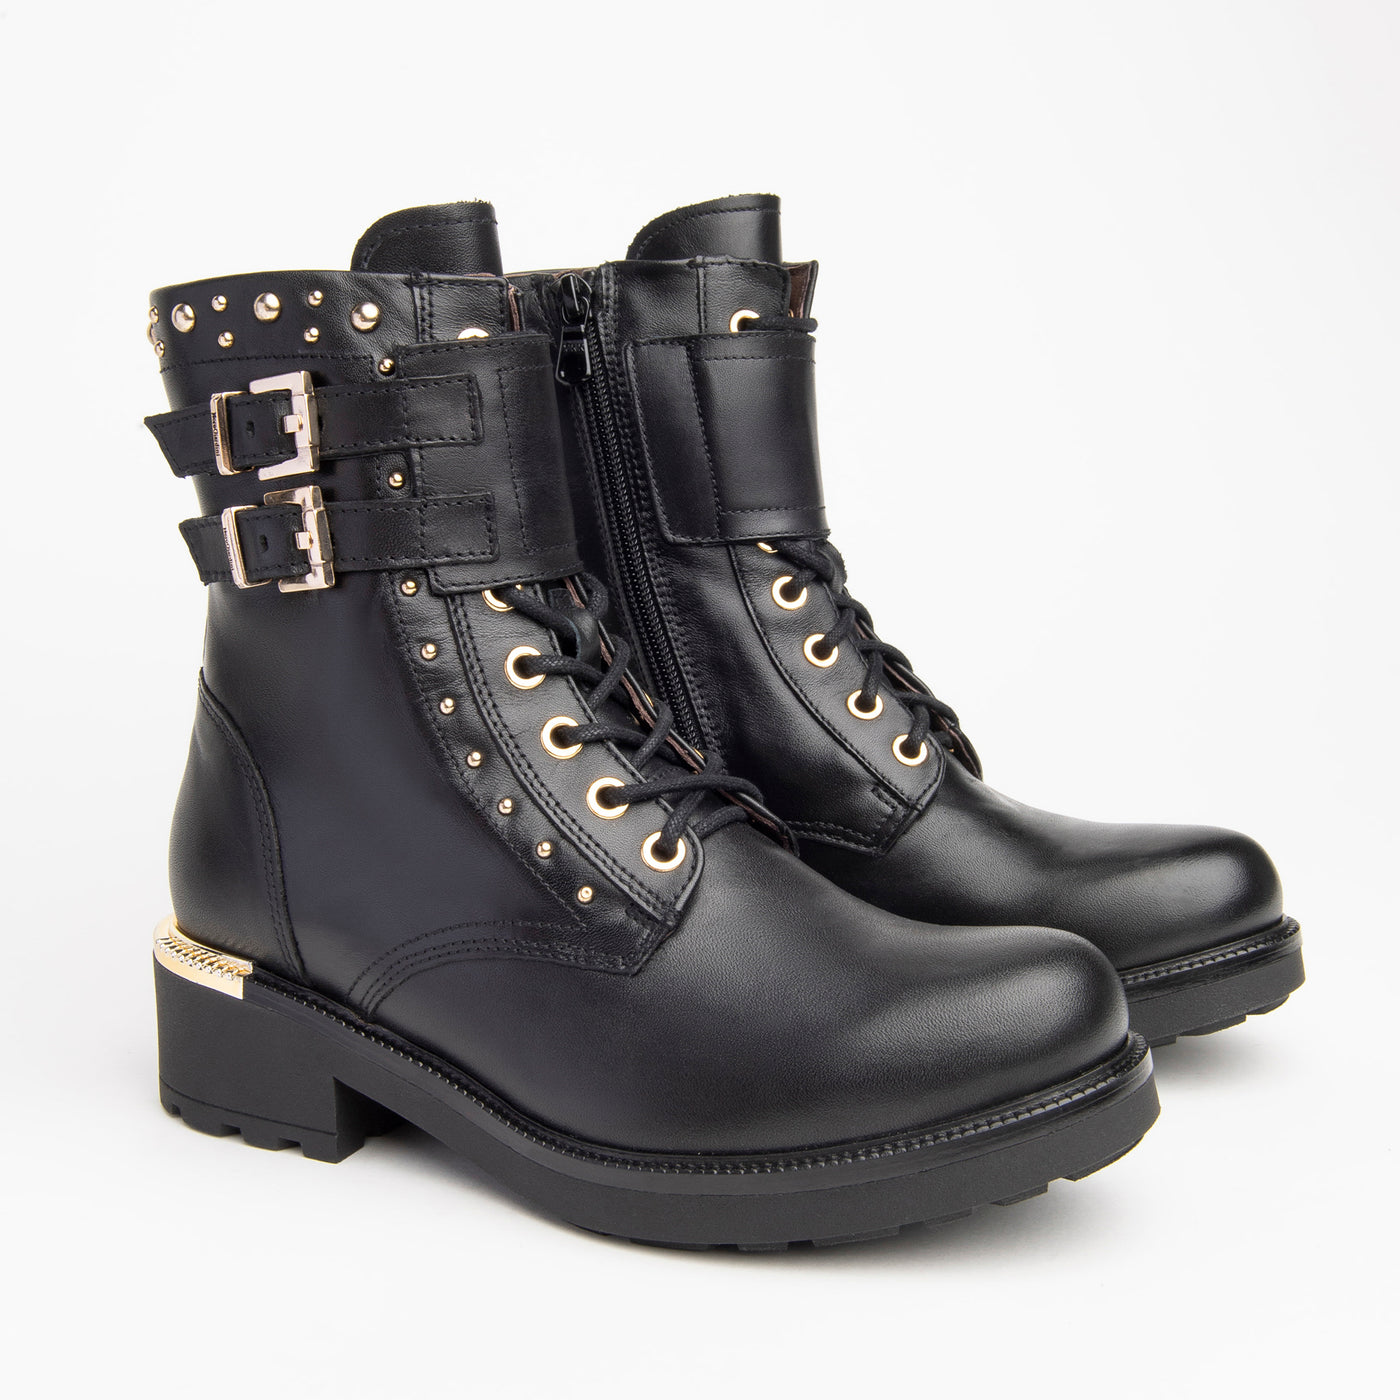 NeroGiardini - I014201D LOW HEEL LACED BOOT WITH BUCKLE DETAIL - BLACK